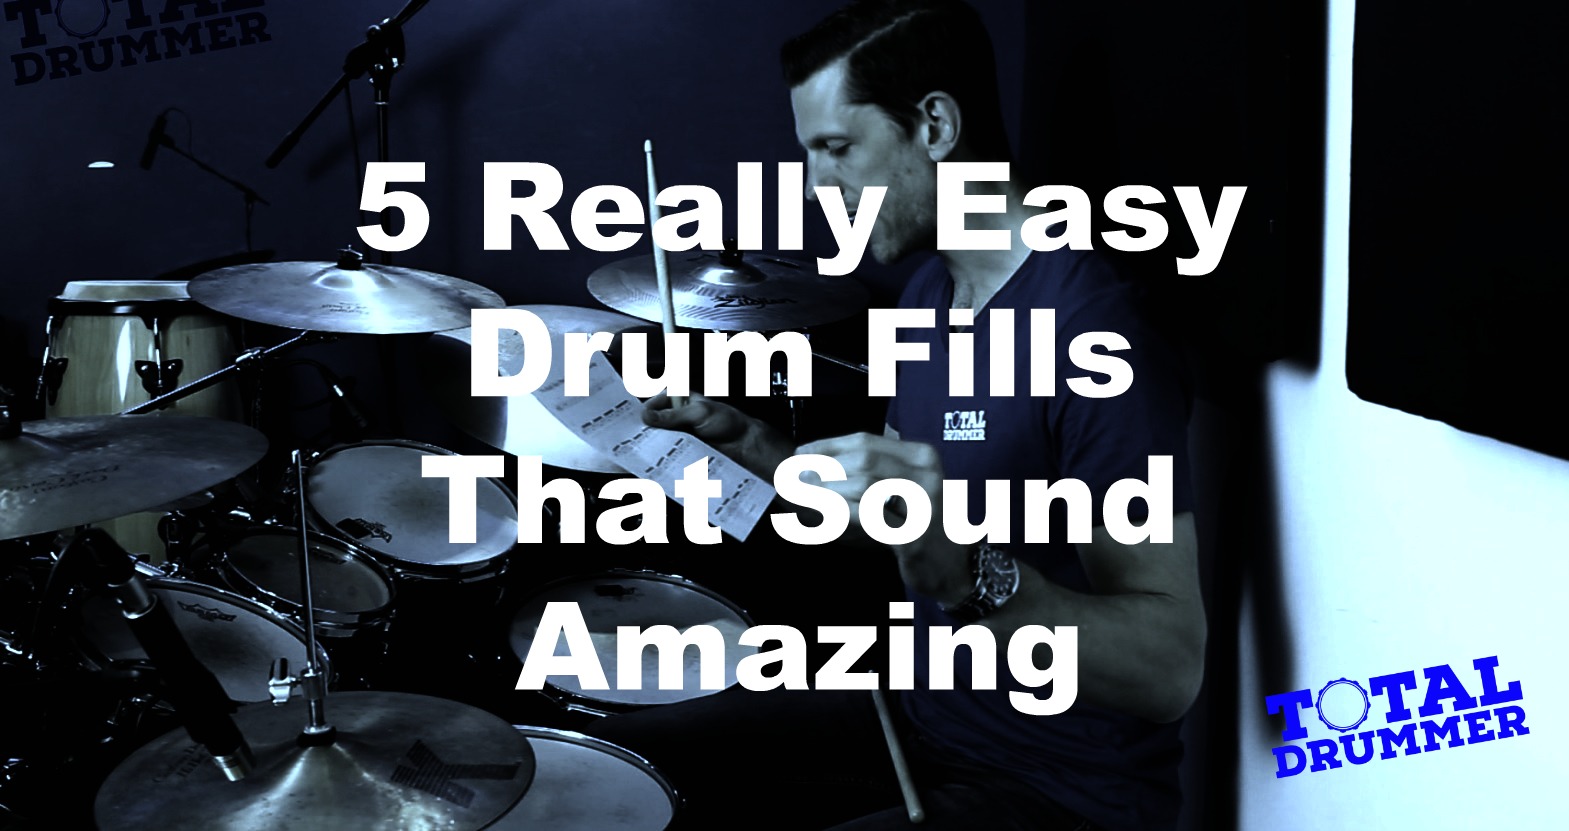 Five Really Easy Drum Fills That Sound Amazing